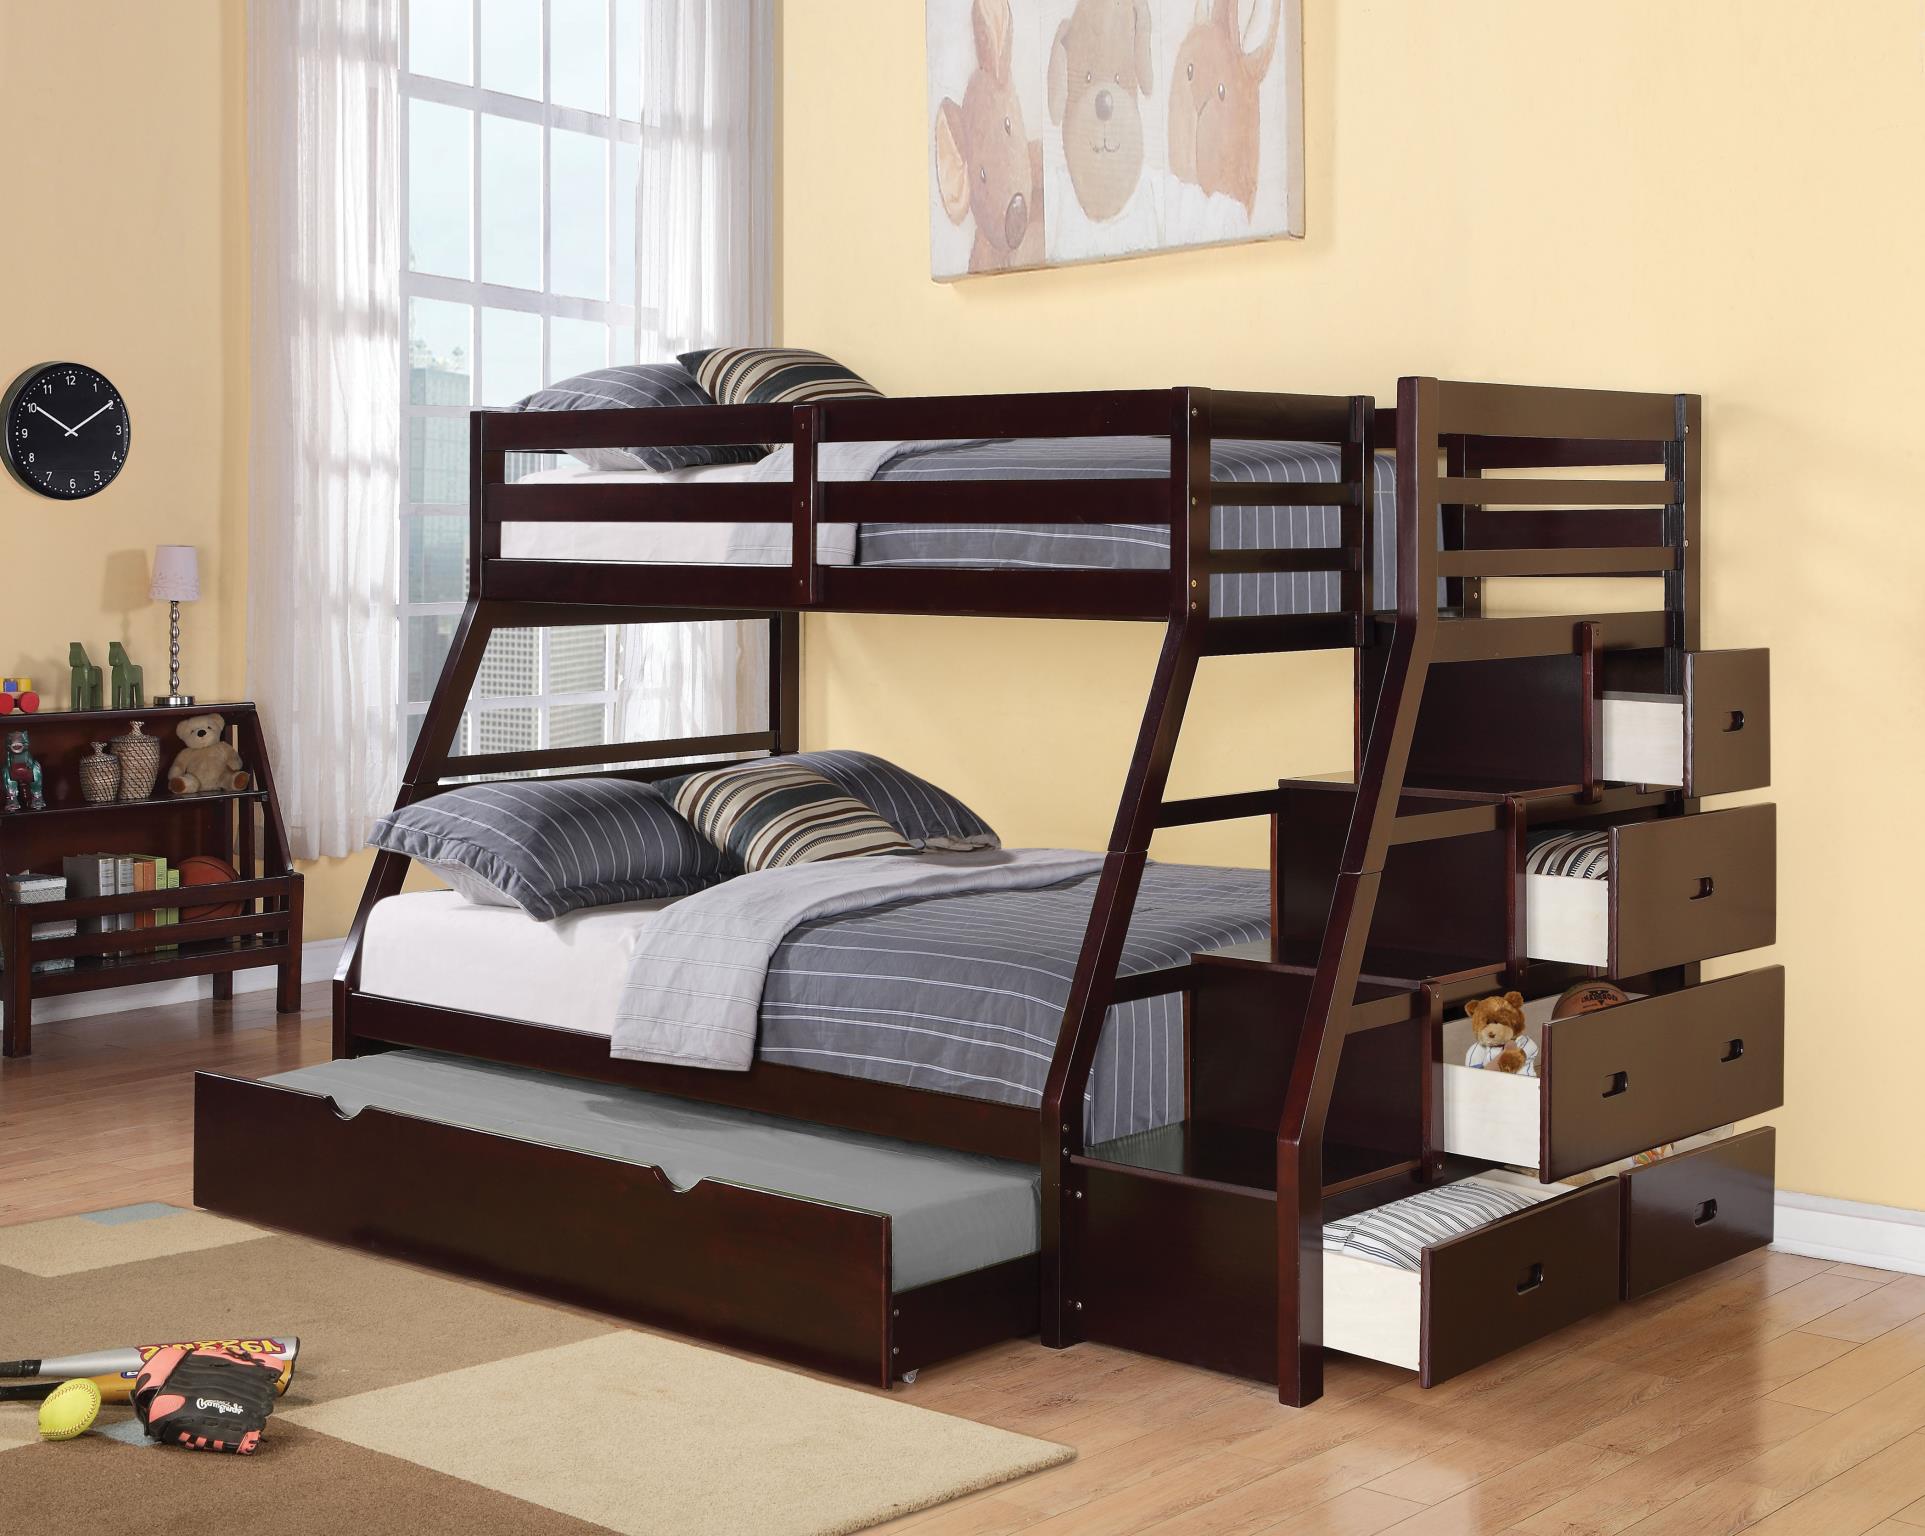 Espresso Twin/Full Bunk Bed /w Trundle and Storage Ladder